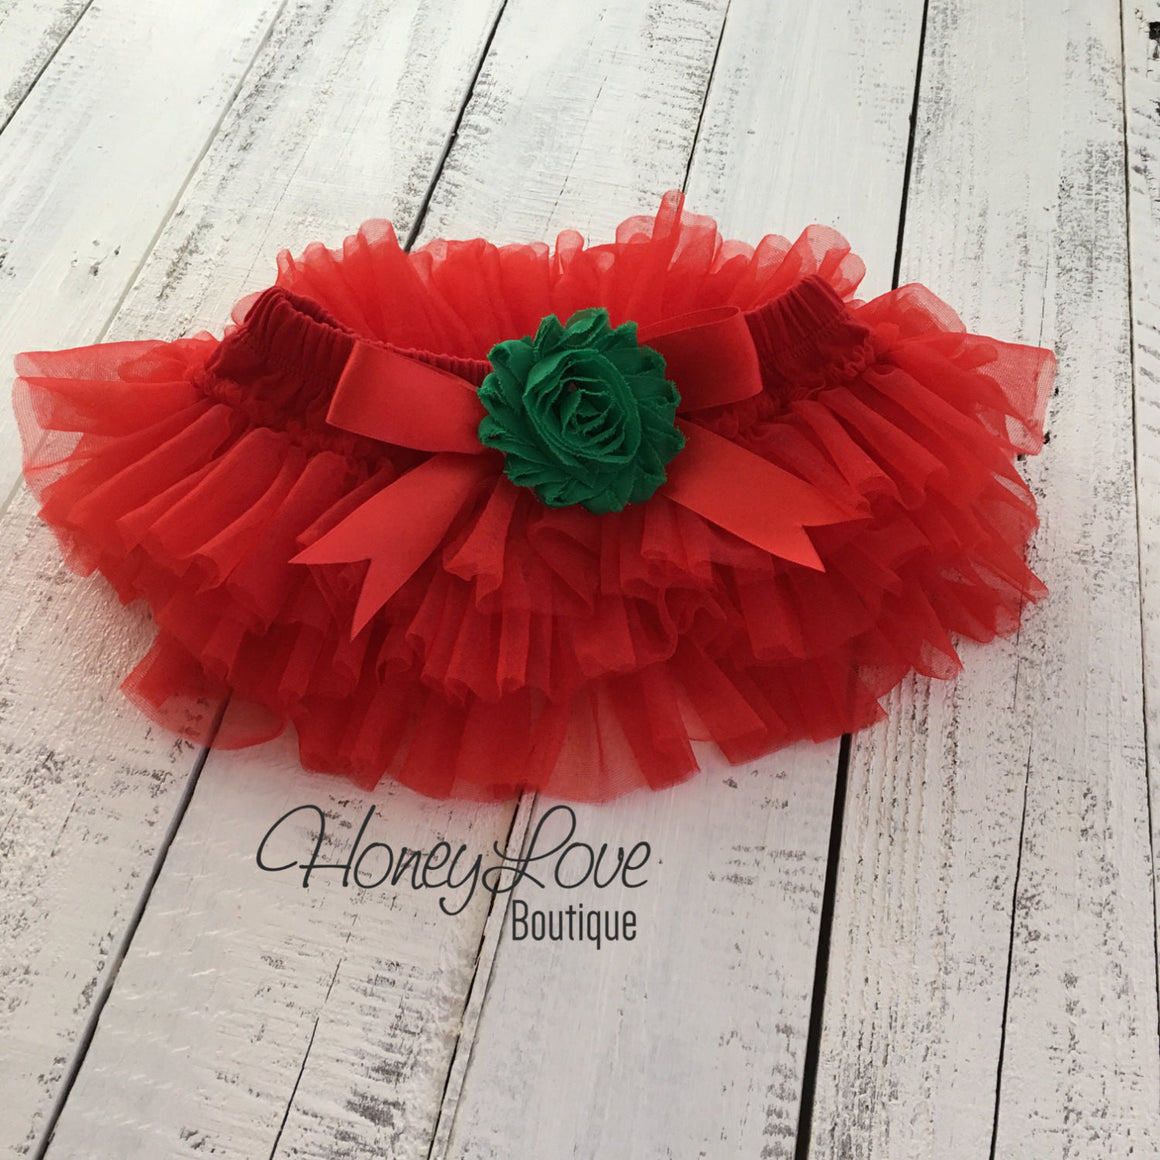 Red/Green Embellished tutu skirt bloomers and Gold/Silver glitter headband - HoneyLoveBoutique